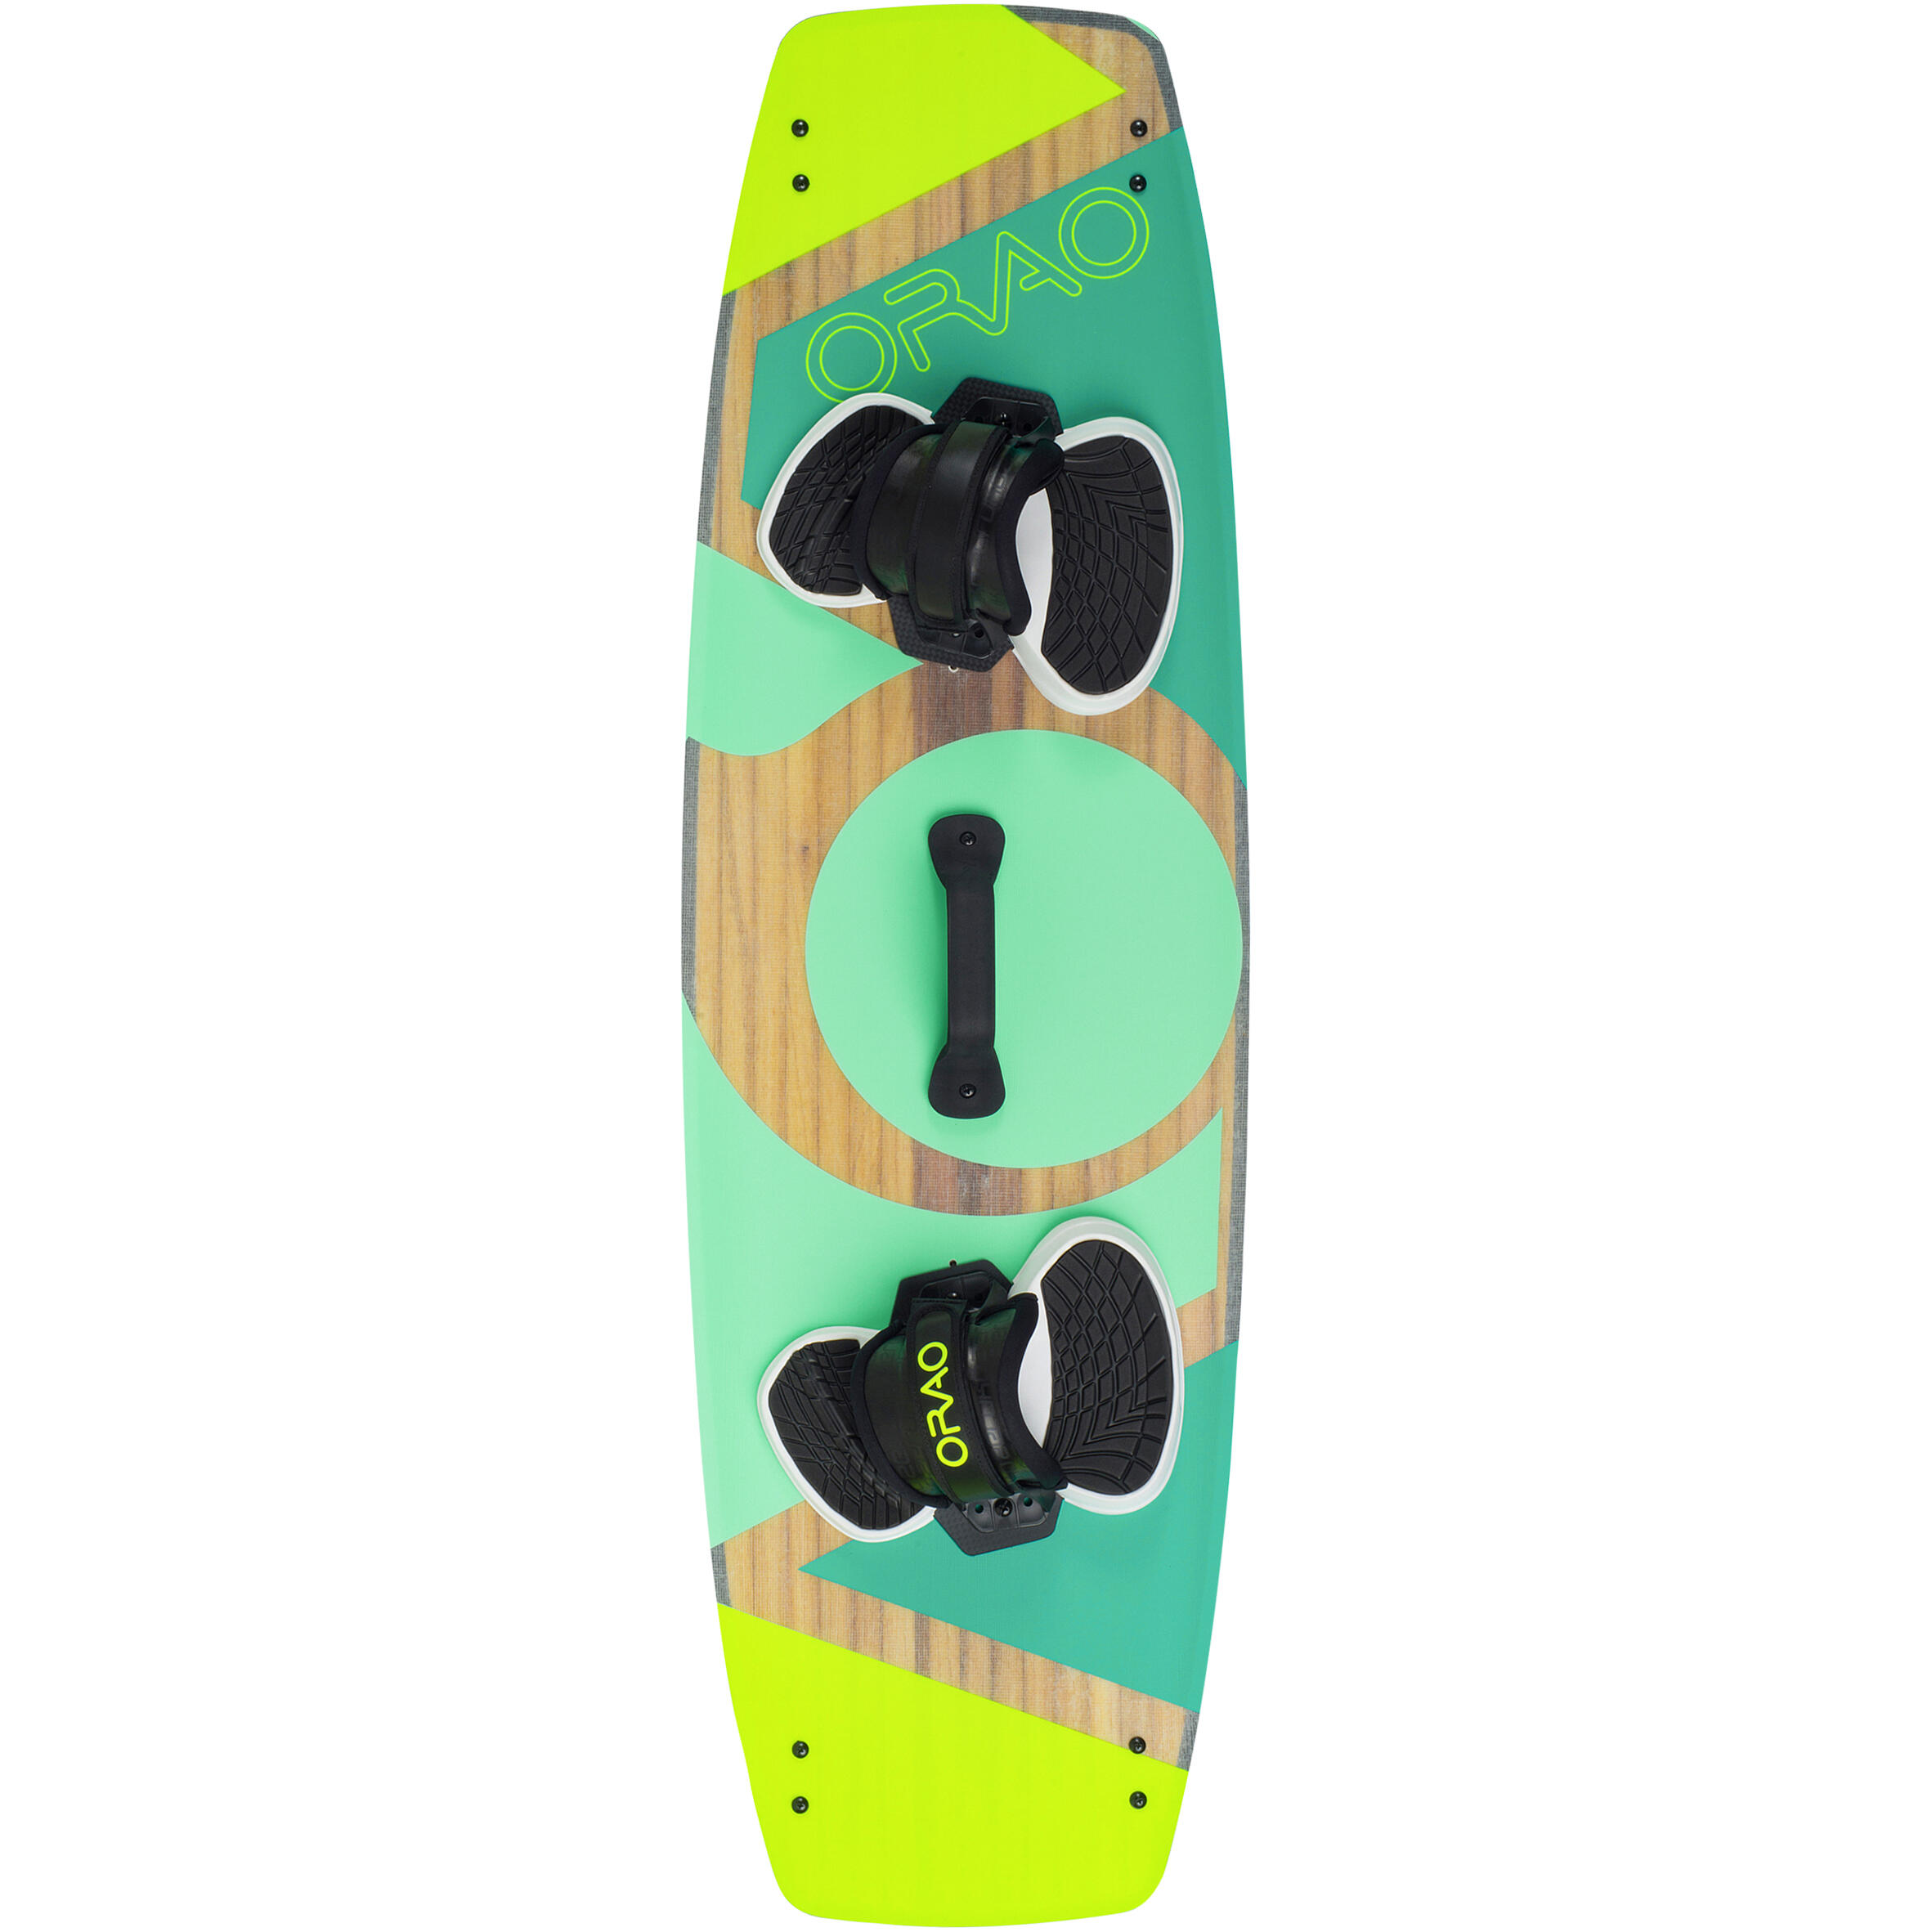 Twintip carbon kitesurf board 136 x 40.5 cm (pads and straps included) - TT500 1/30